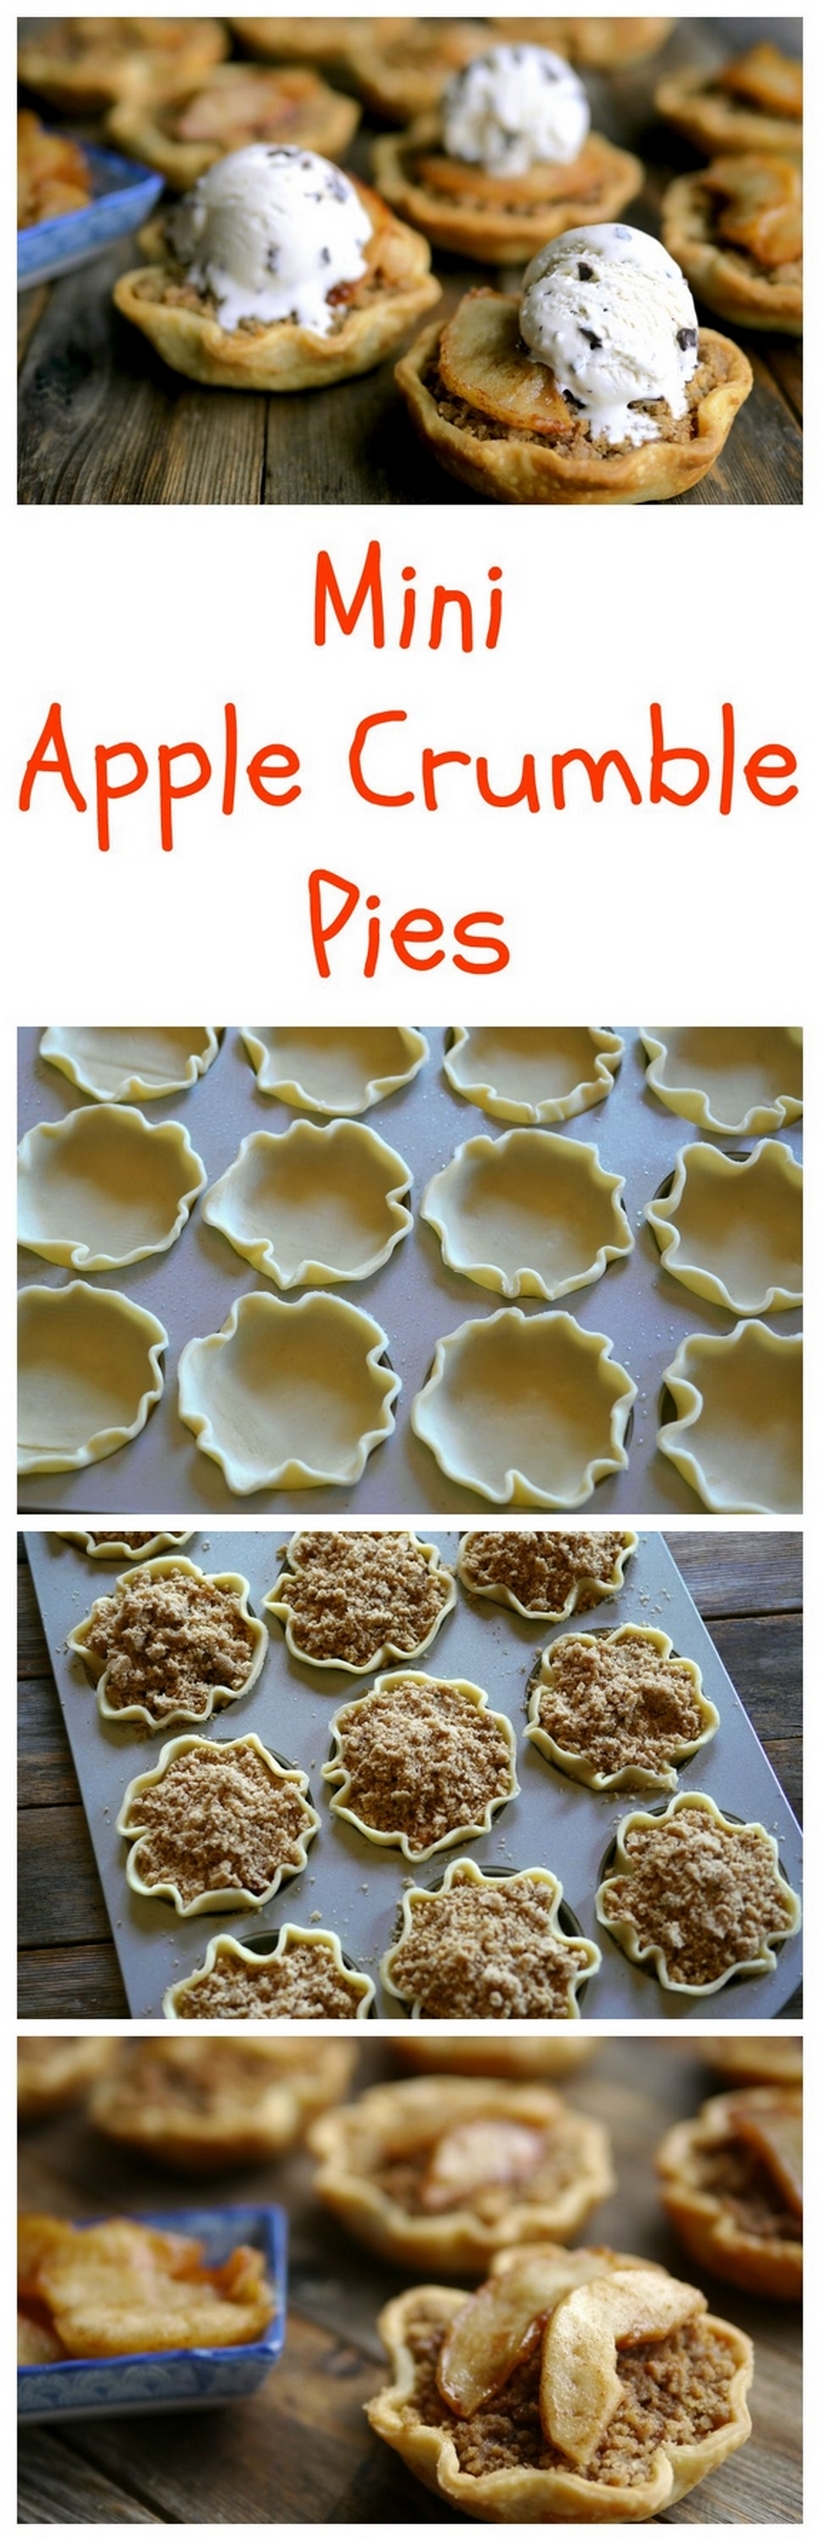 Pie skills are NOT necessary for these adorable MINI APPLE CRUMBLE PIES. They are sized perfectly to enjoy after a big meal. #noblepig #pie #minidesserts #holidaydessert #appledesserts #applepie via @cmpollak1